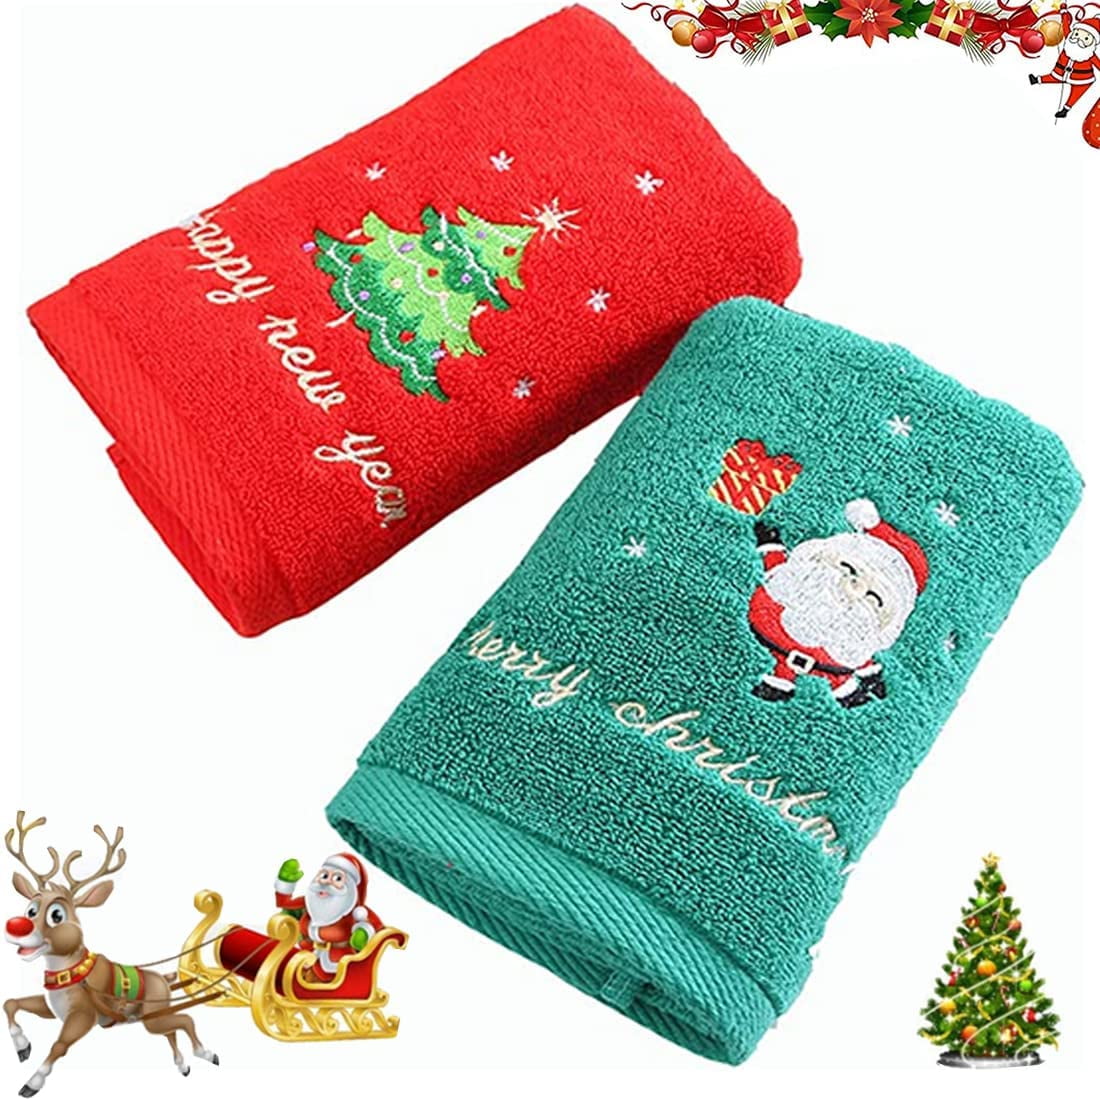 Indecor Home 2 Pack Hand Towels, Cute Funny Decor, for Bathroom, Kitchen  Sink, Finger Tip Towels 100% Cotton, Plush and Super Absorbent 16x26 Inches